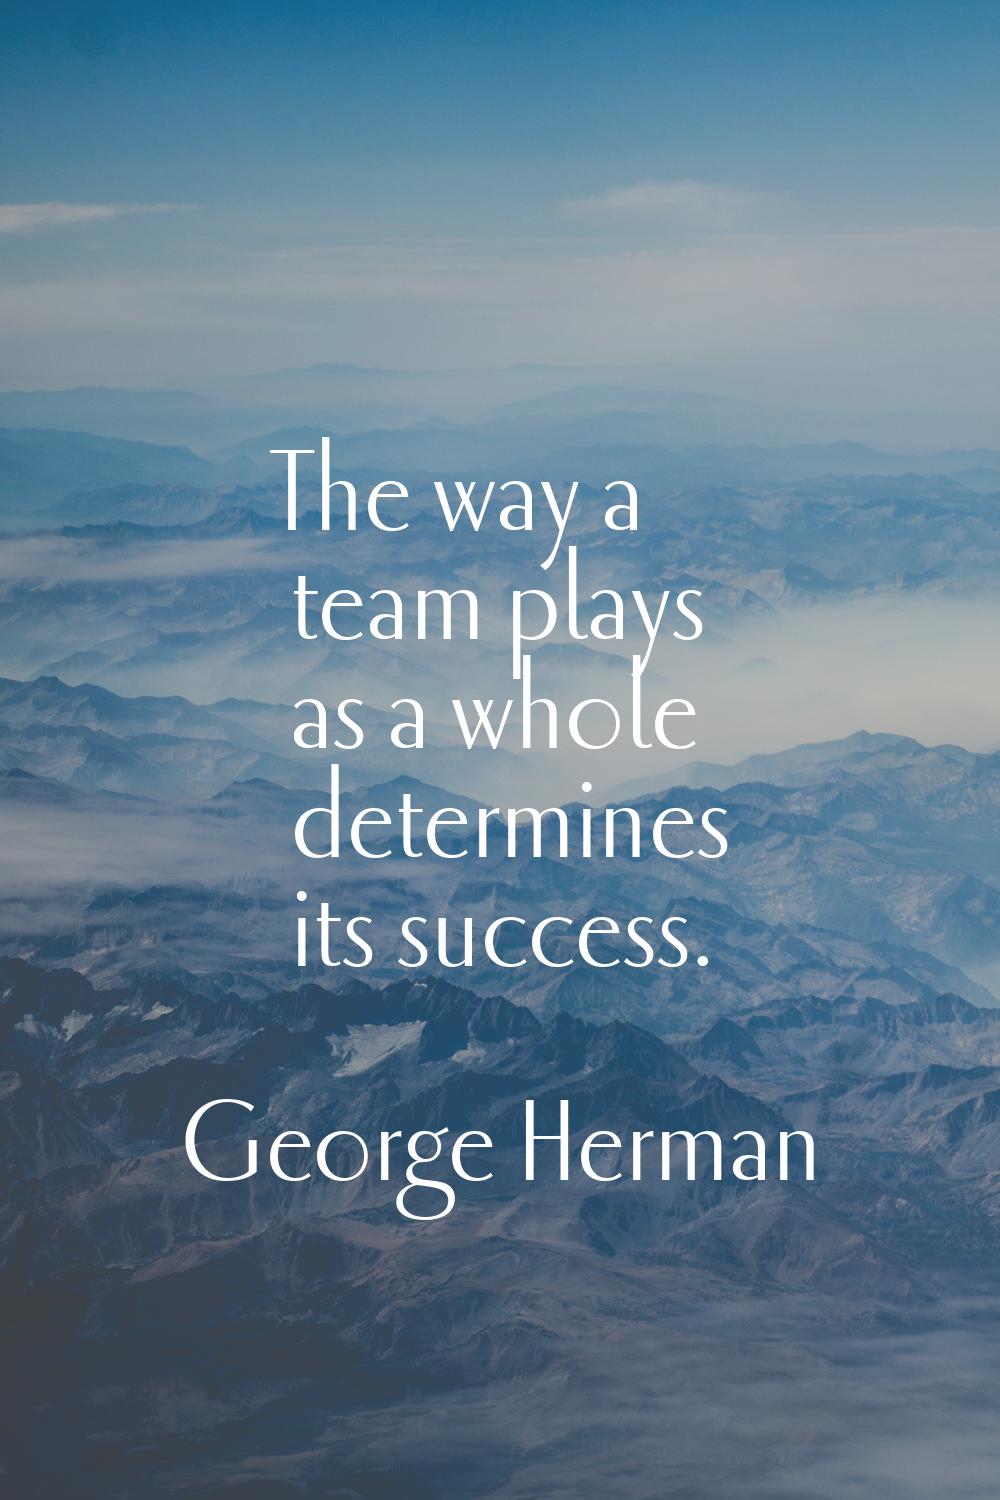 The way a team plays as a whole determines its success.